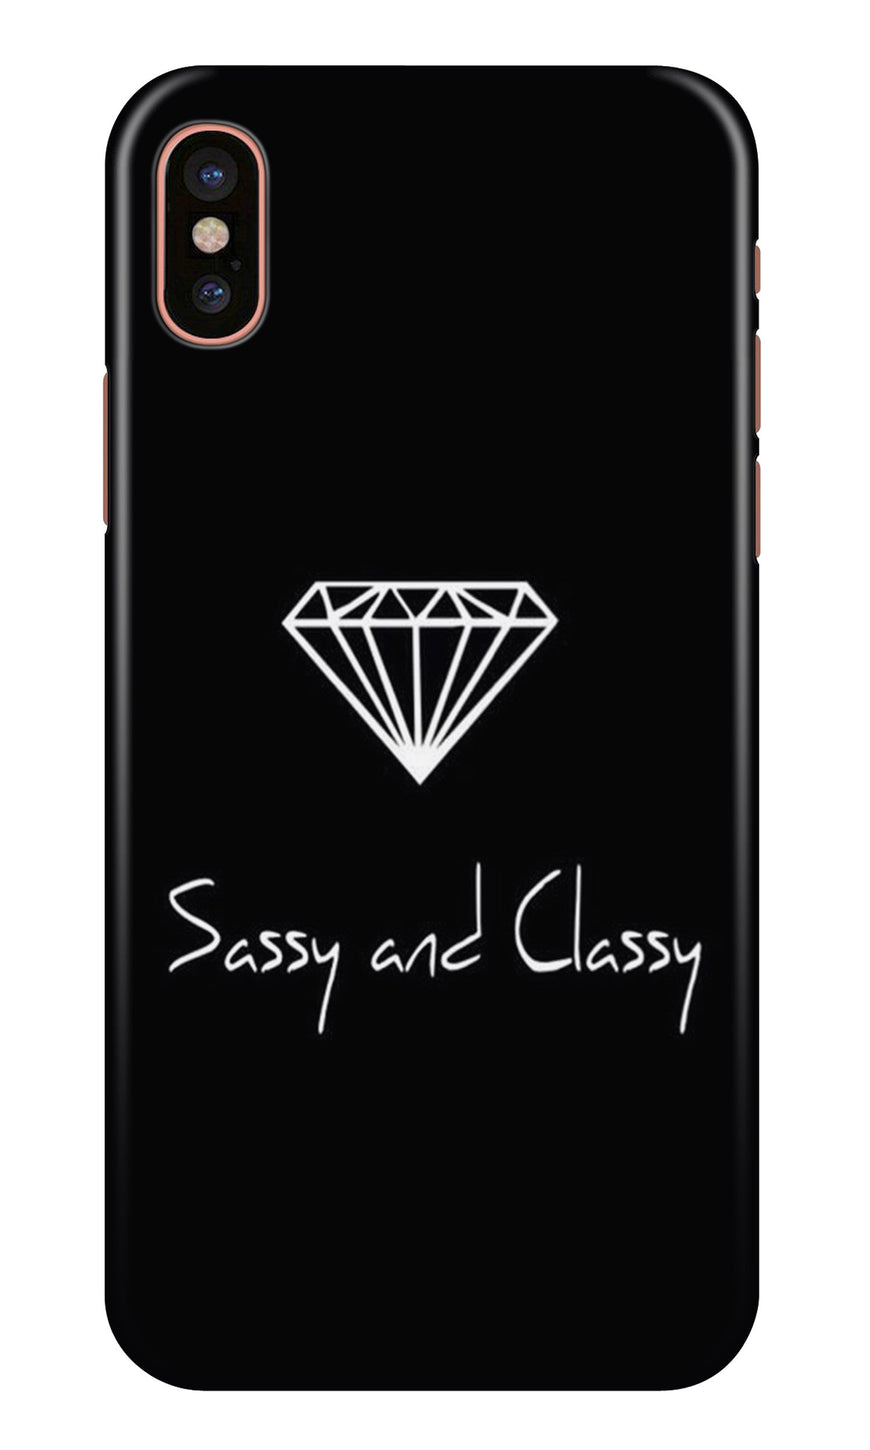 Sassy and Classy Case for iPhone Xs Max (Design No. 264)